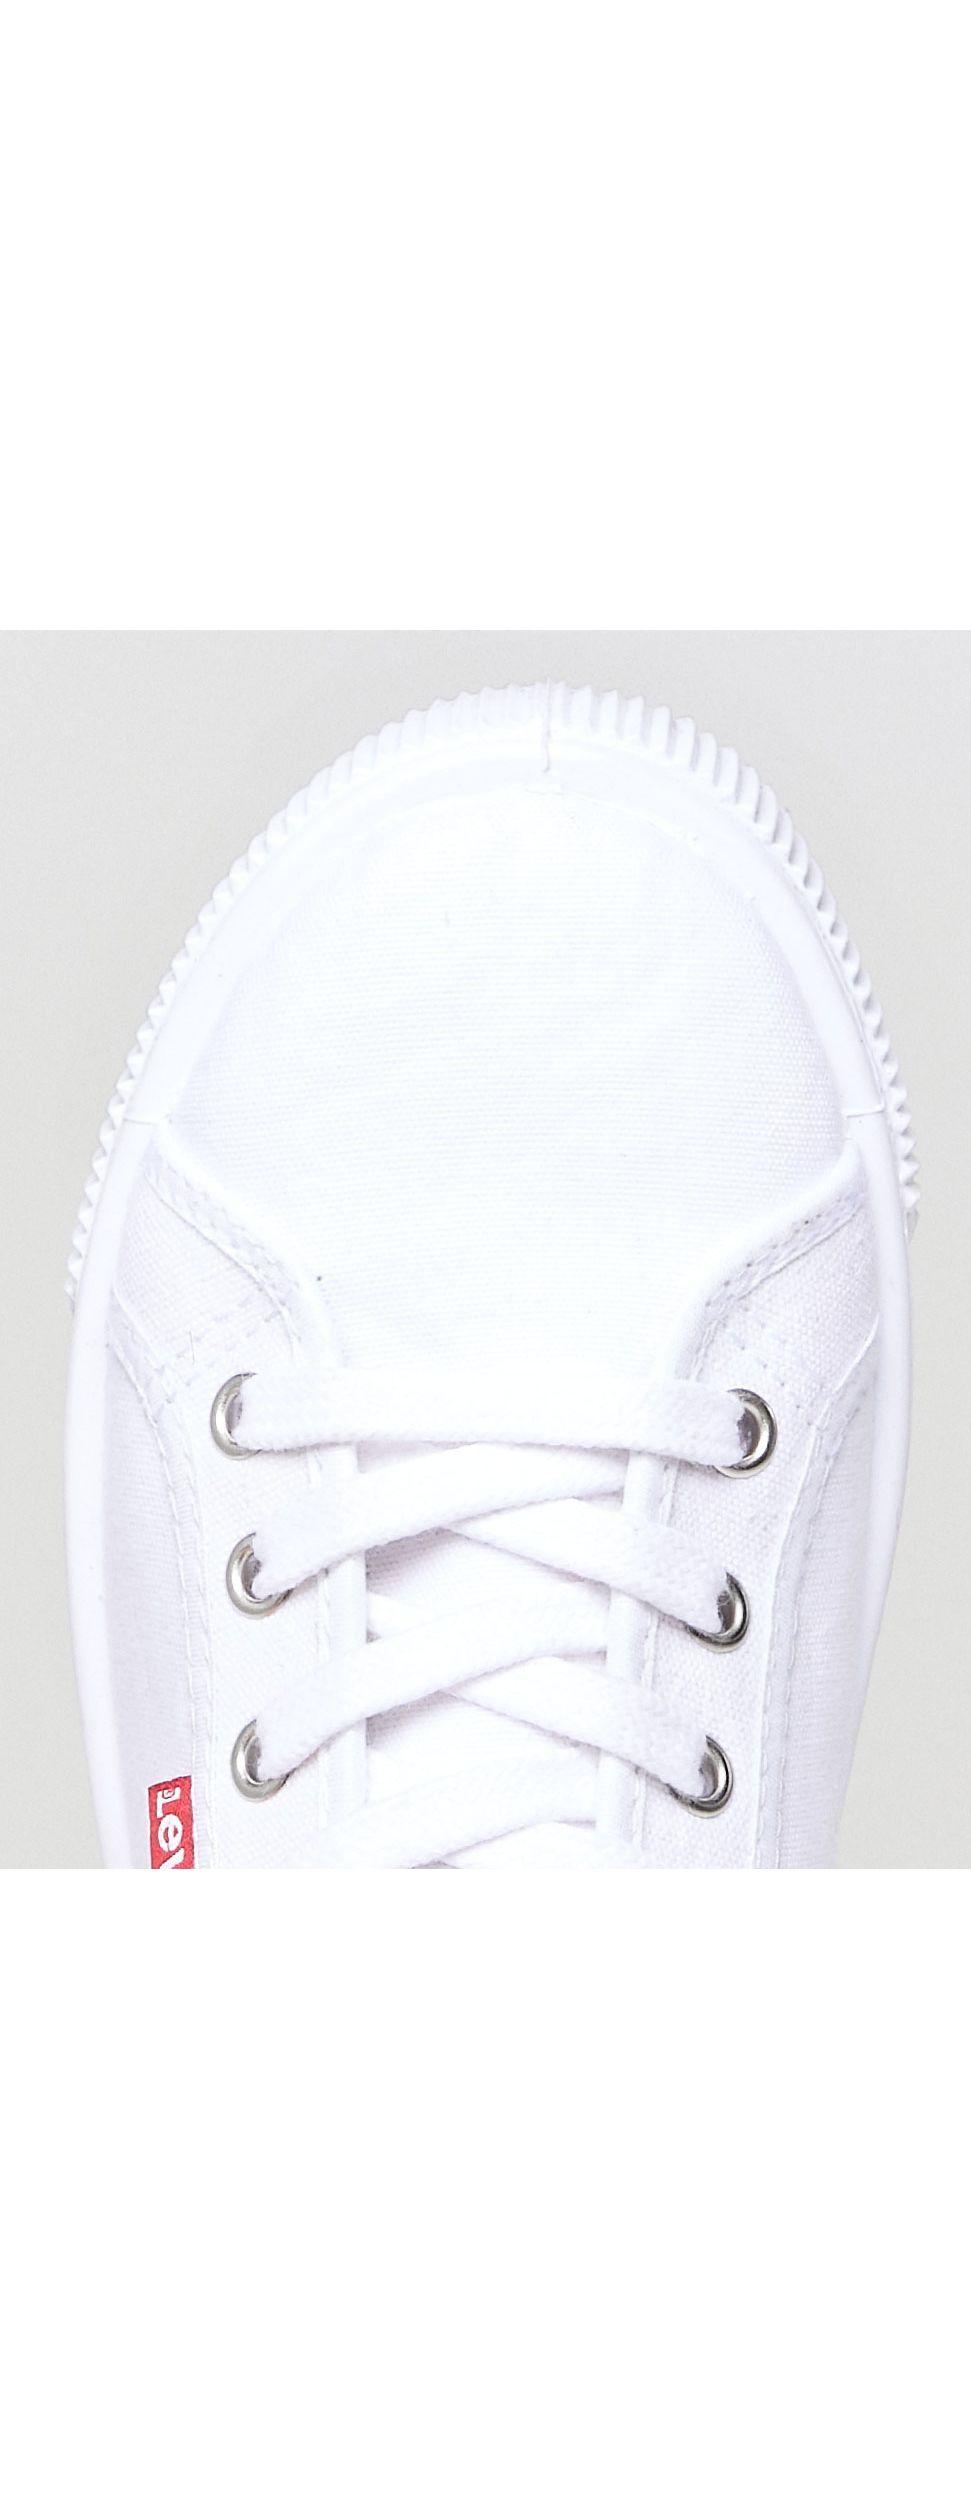 Levi's Canvas Shoe With Red Tab in White - Lyst